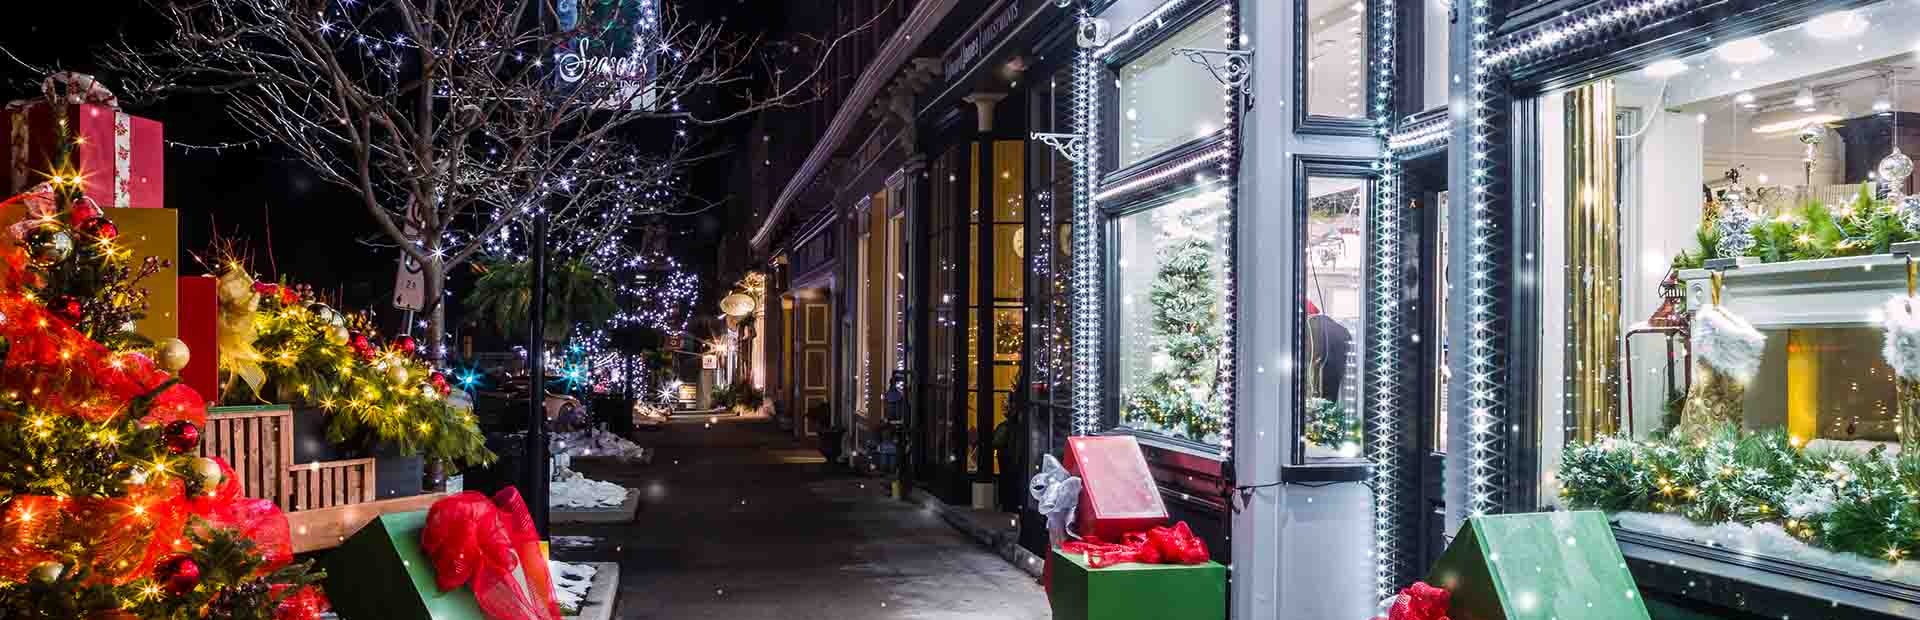 Have a Hallmark Holiday Season in these Charming Historic Downtowns